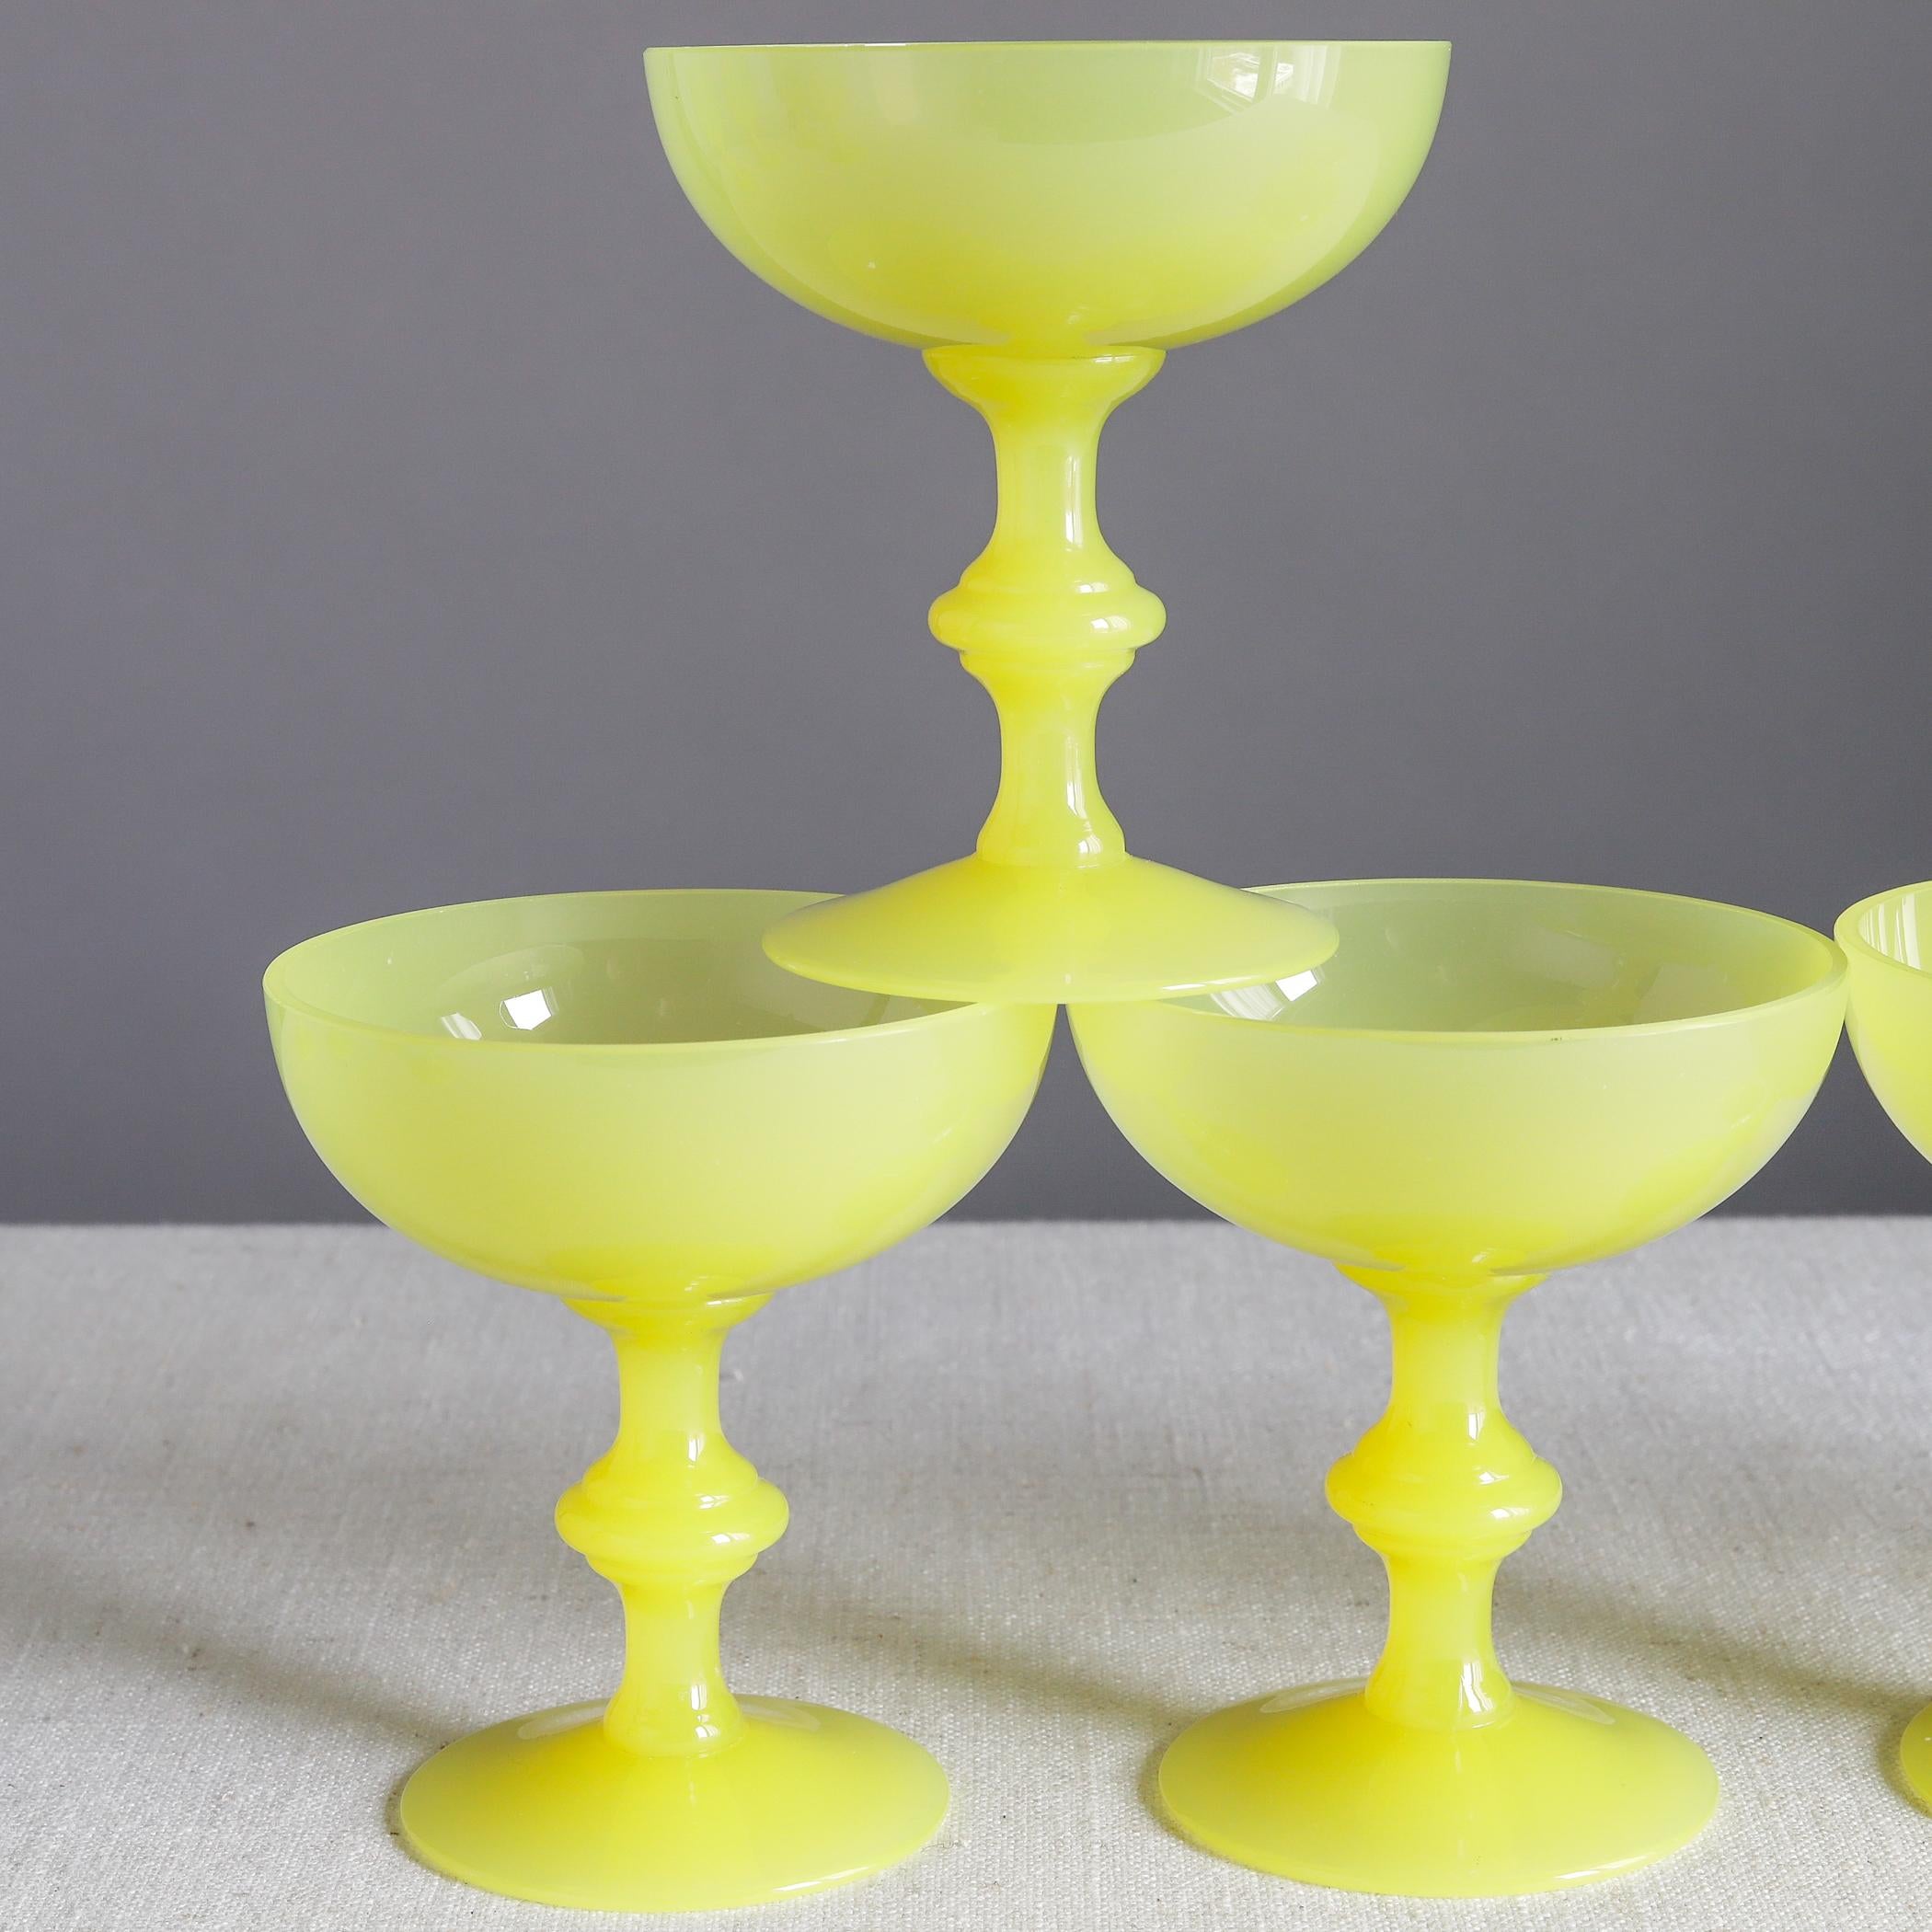 Set of five yellow opaline glass champagne coupes or sherbet glasses Portieux Vallerysthal of France, each with a knopped stem. 

Each measures about 4 1/4 inches high, 3 3/4 inches diameter across the mouth, mid-20th century.

Overall condition